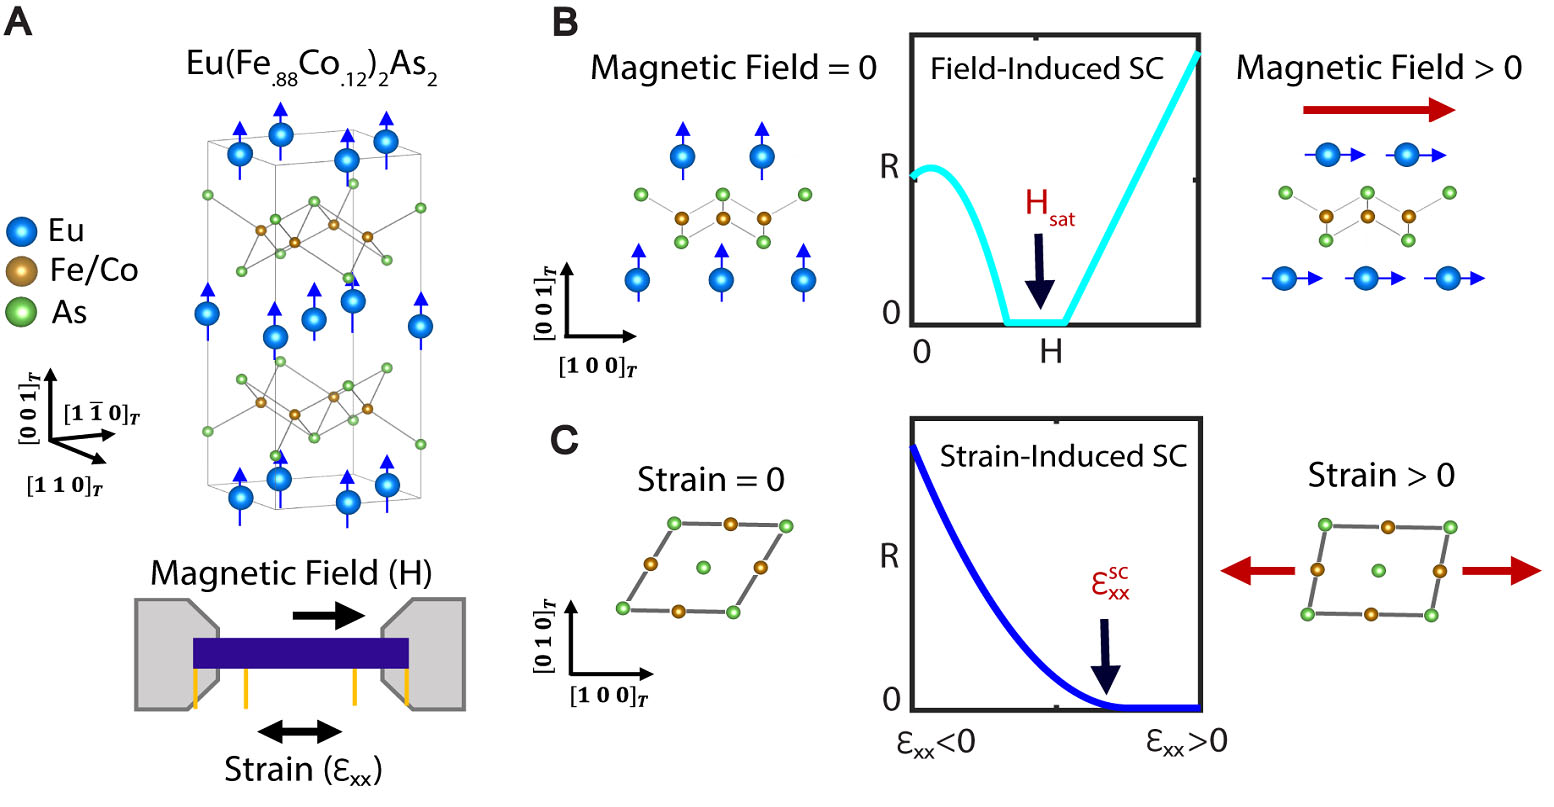 Various diagrams show the application of magnetic fields and strain to superconducting material, allowing scientists to activate its superconducting properties